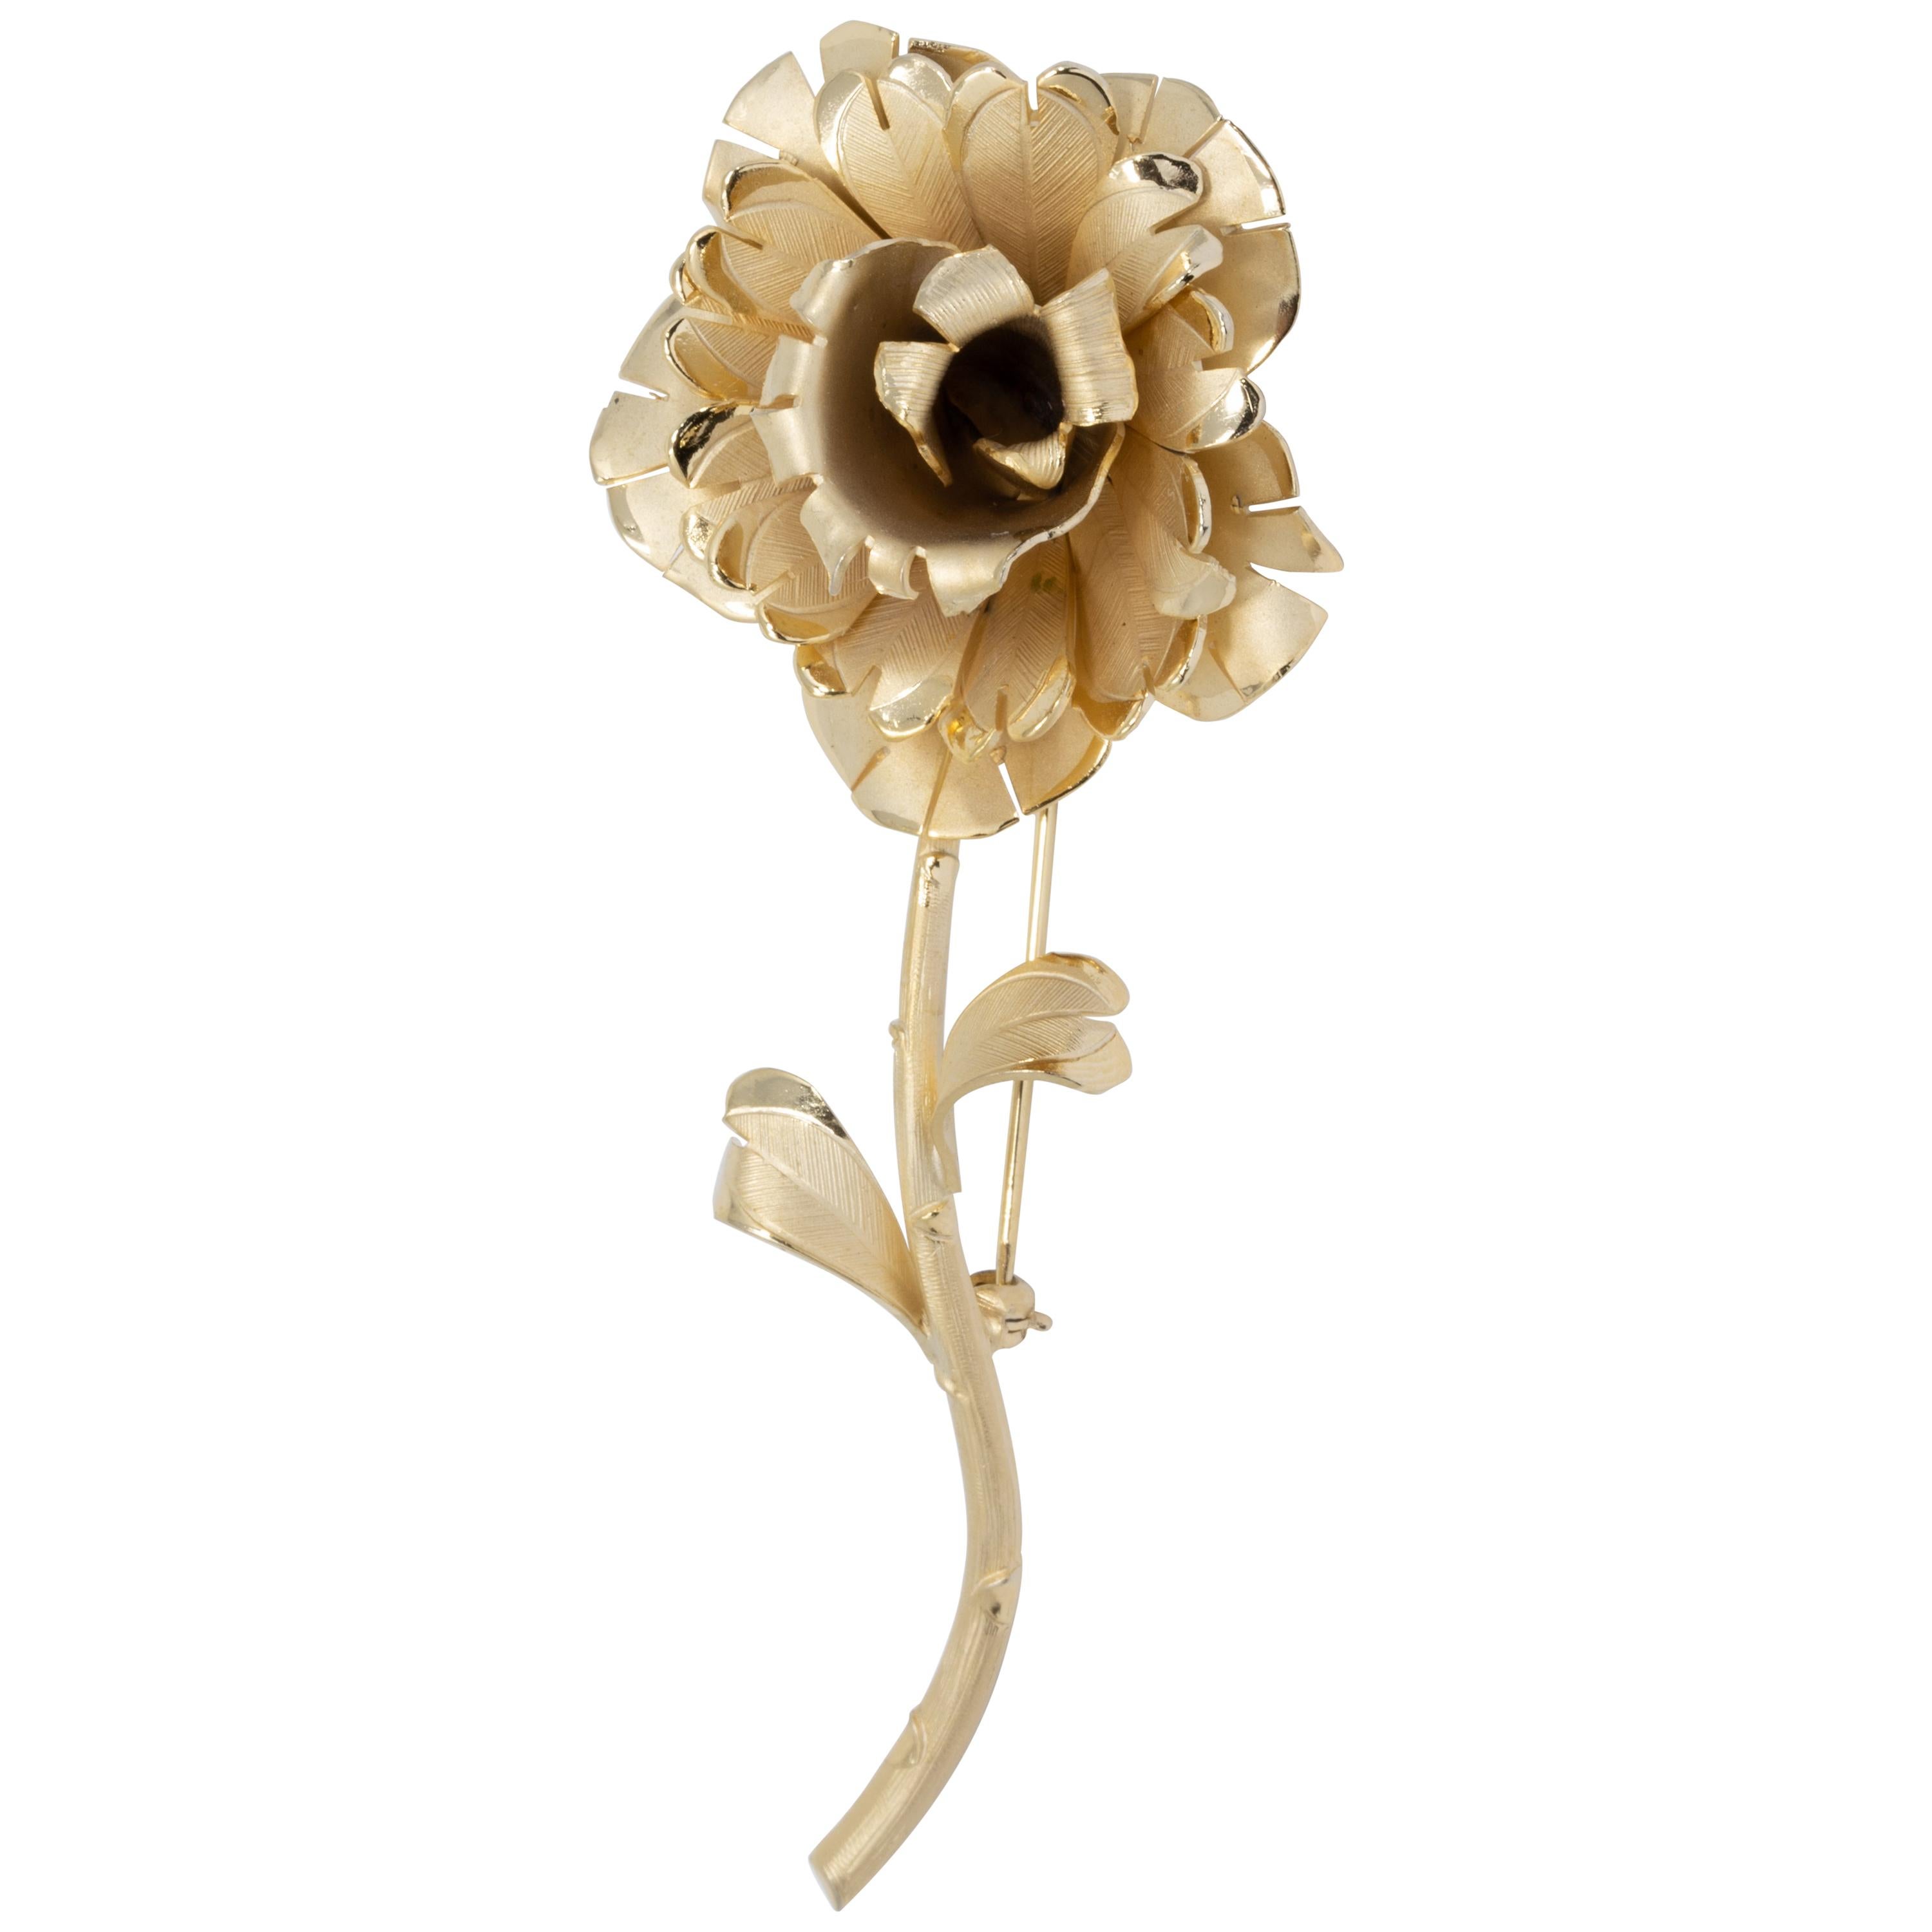 Primex Golden Flower Pin Brooch with Layered Textured Petals